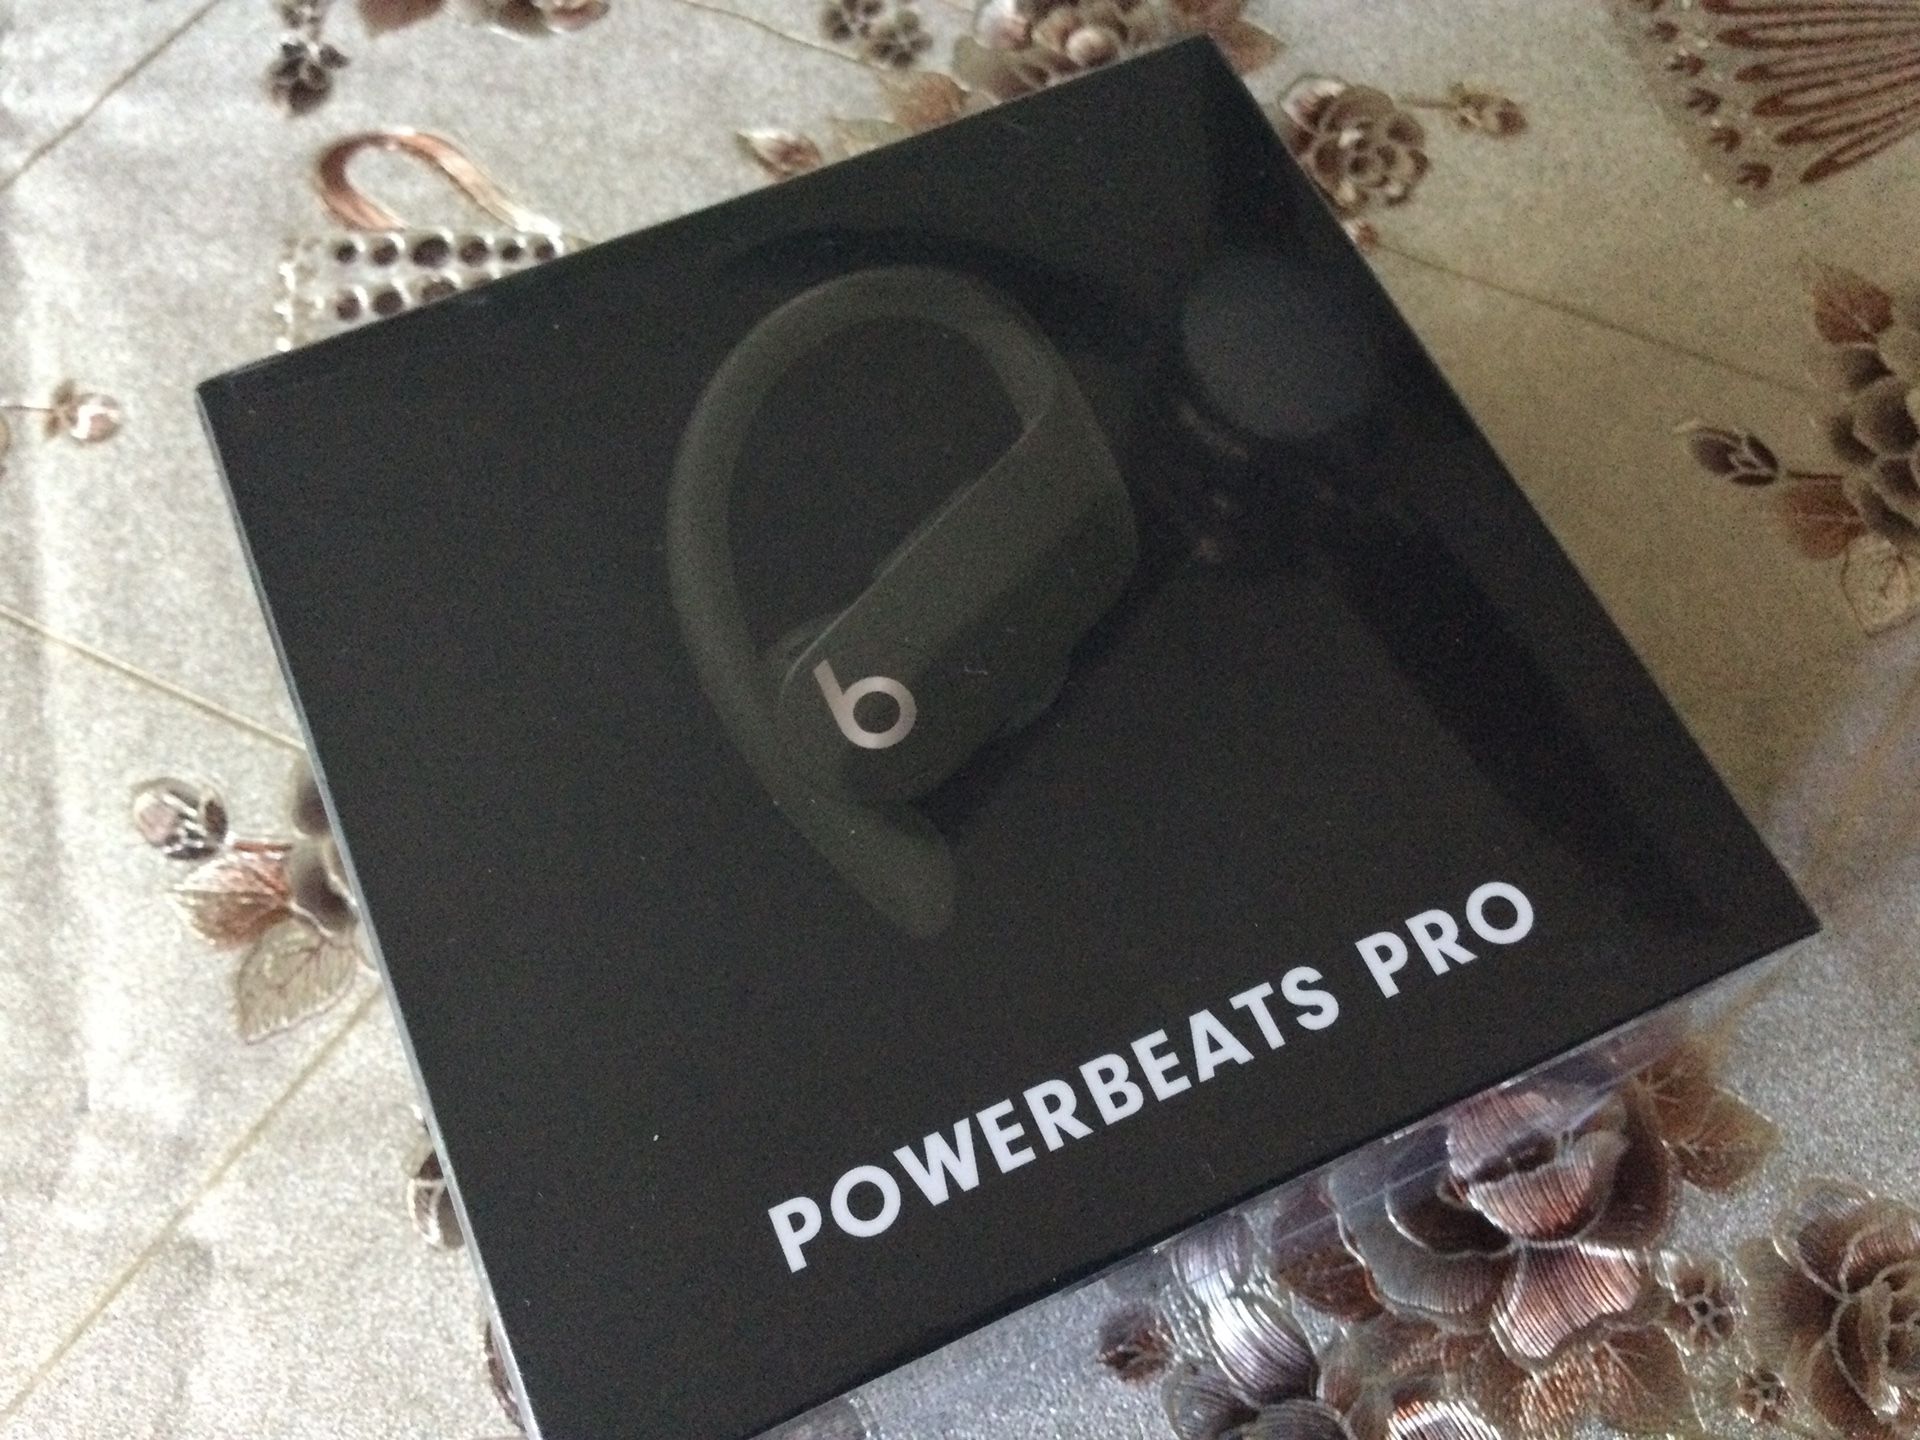 POWERBEATS PRO (Moss Color ) Brand New Still Sealed $110 FIRM No Trades Pick Up Only